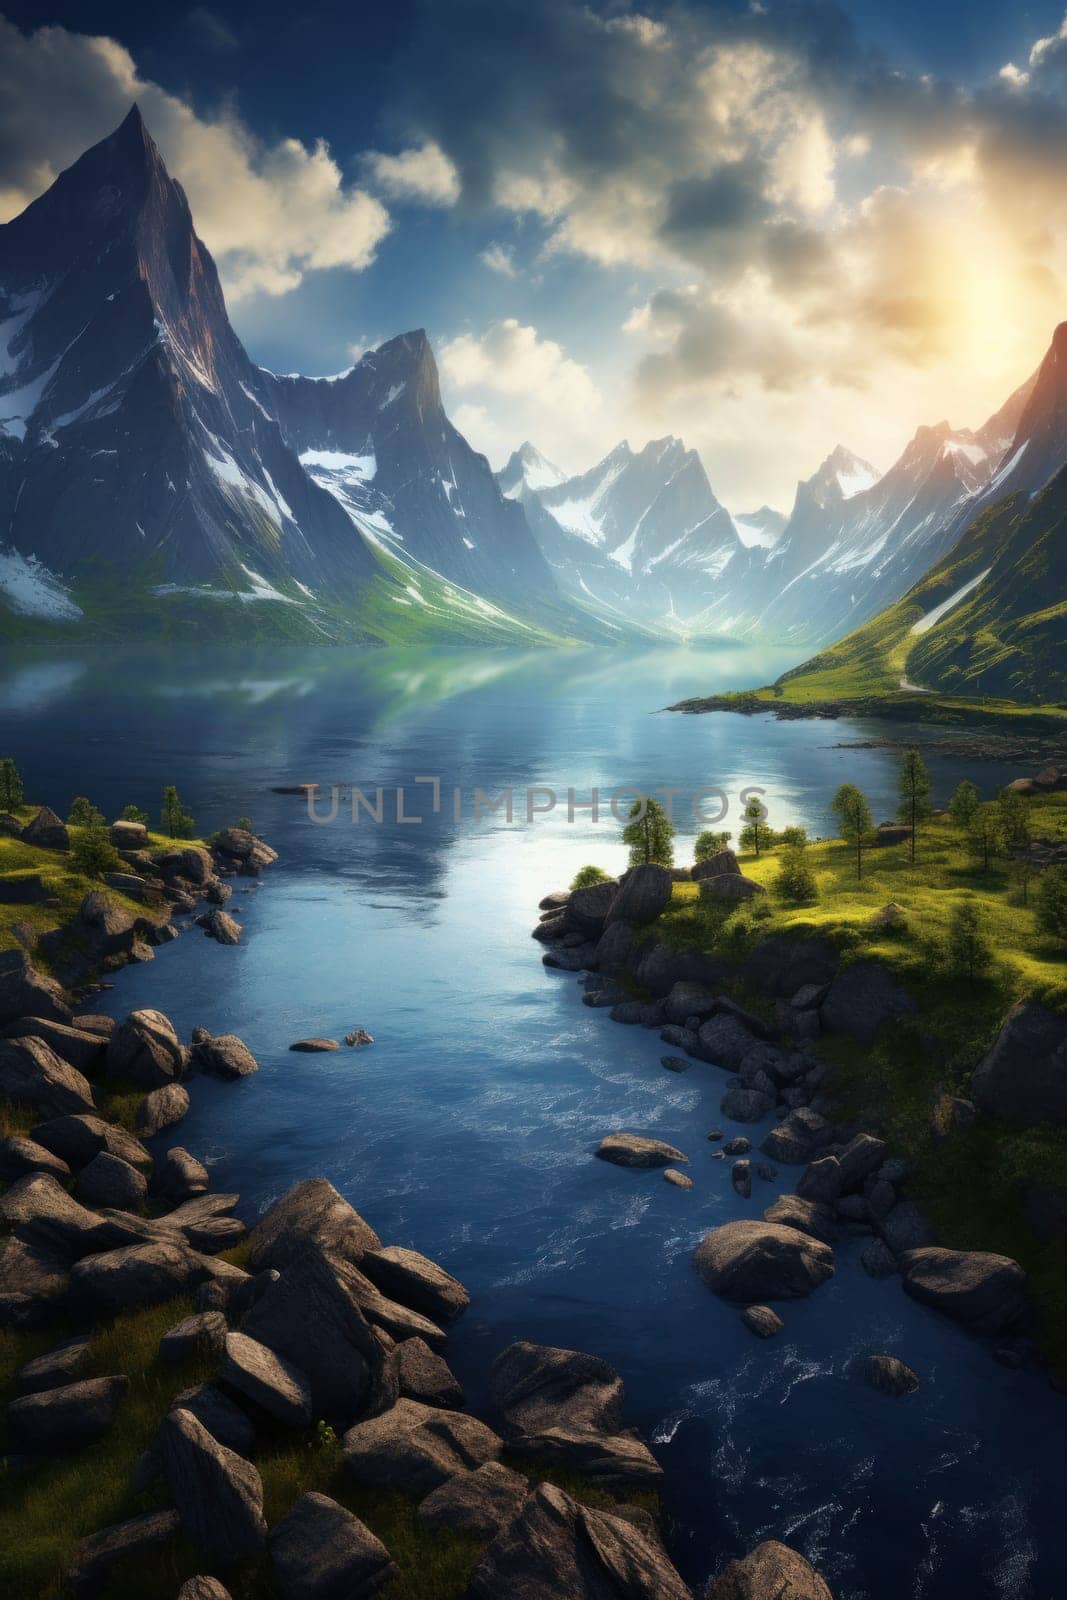 A beautiful mountain landscape with a river and rocks, AI by starush